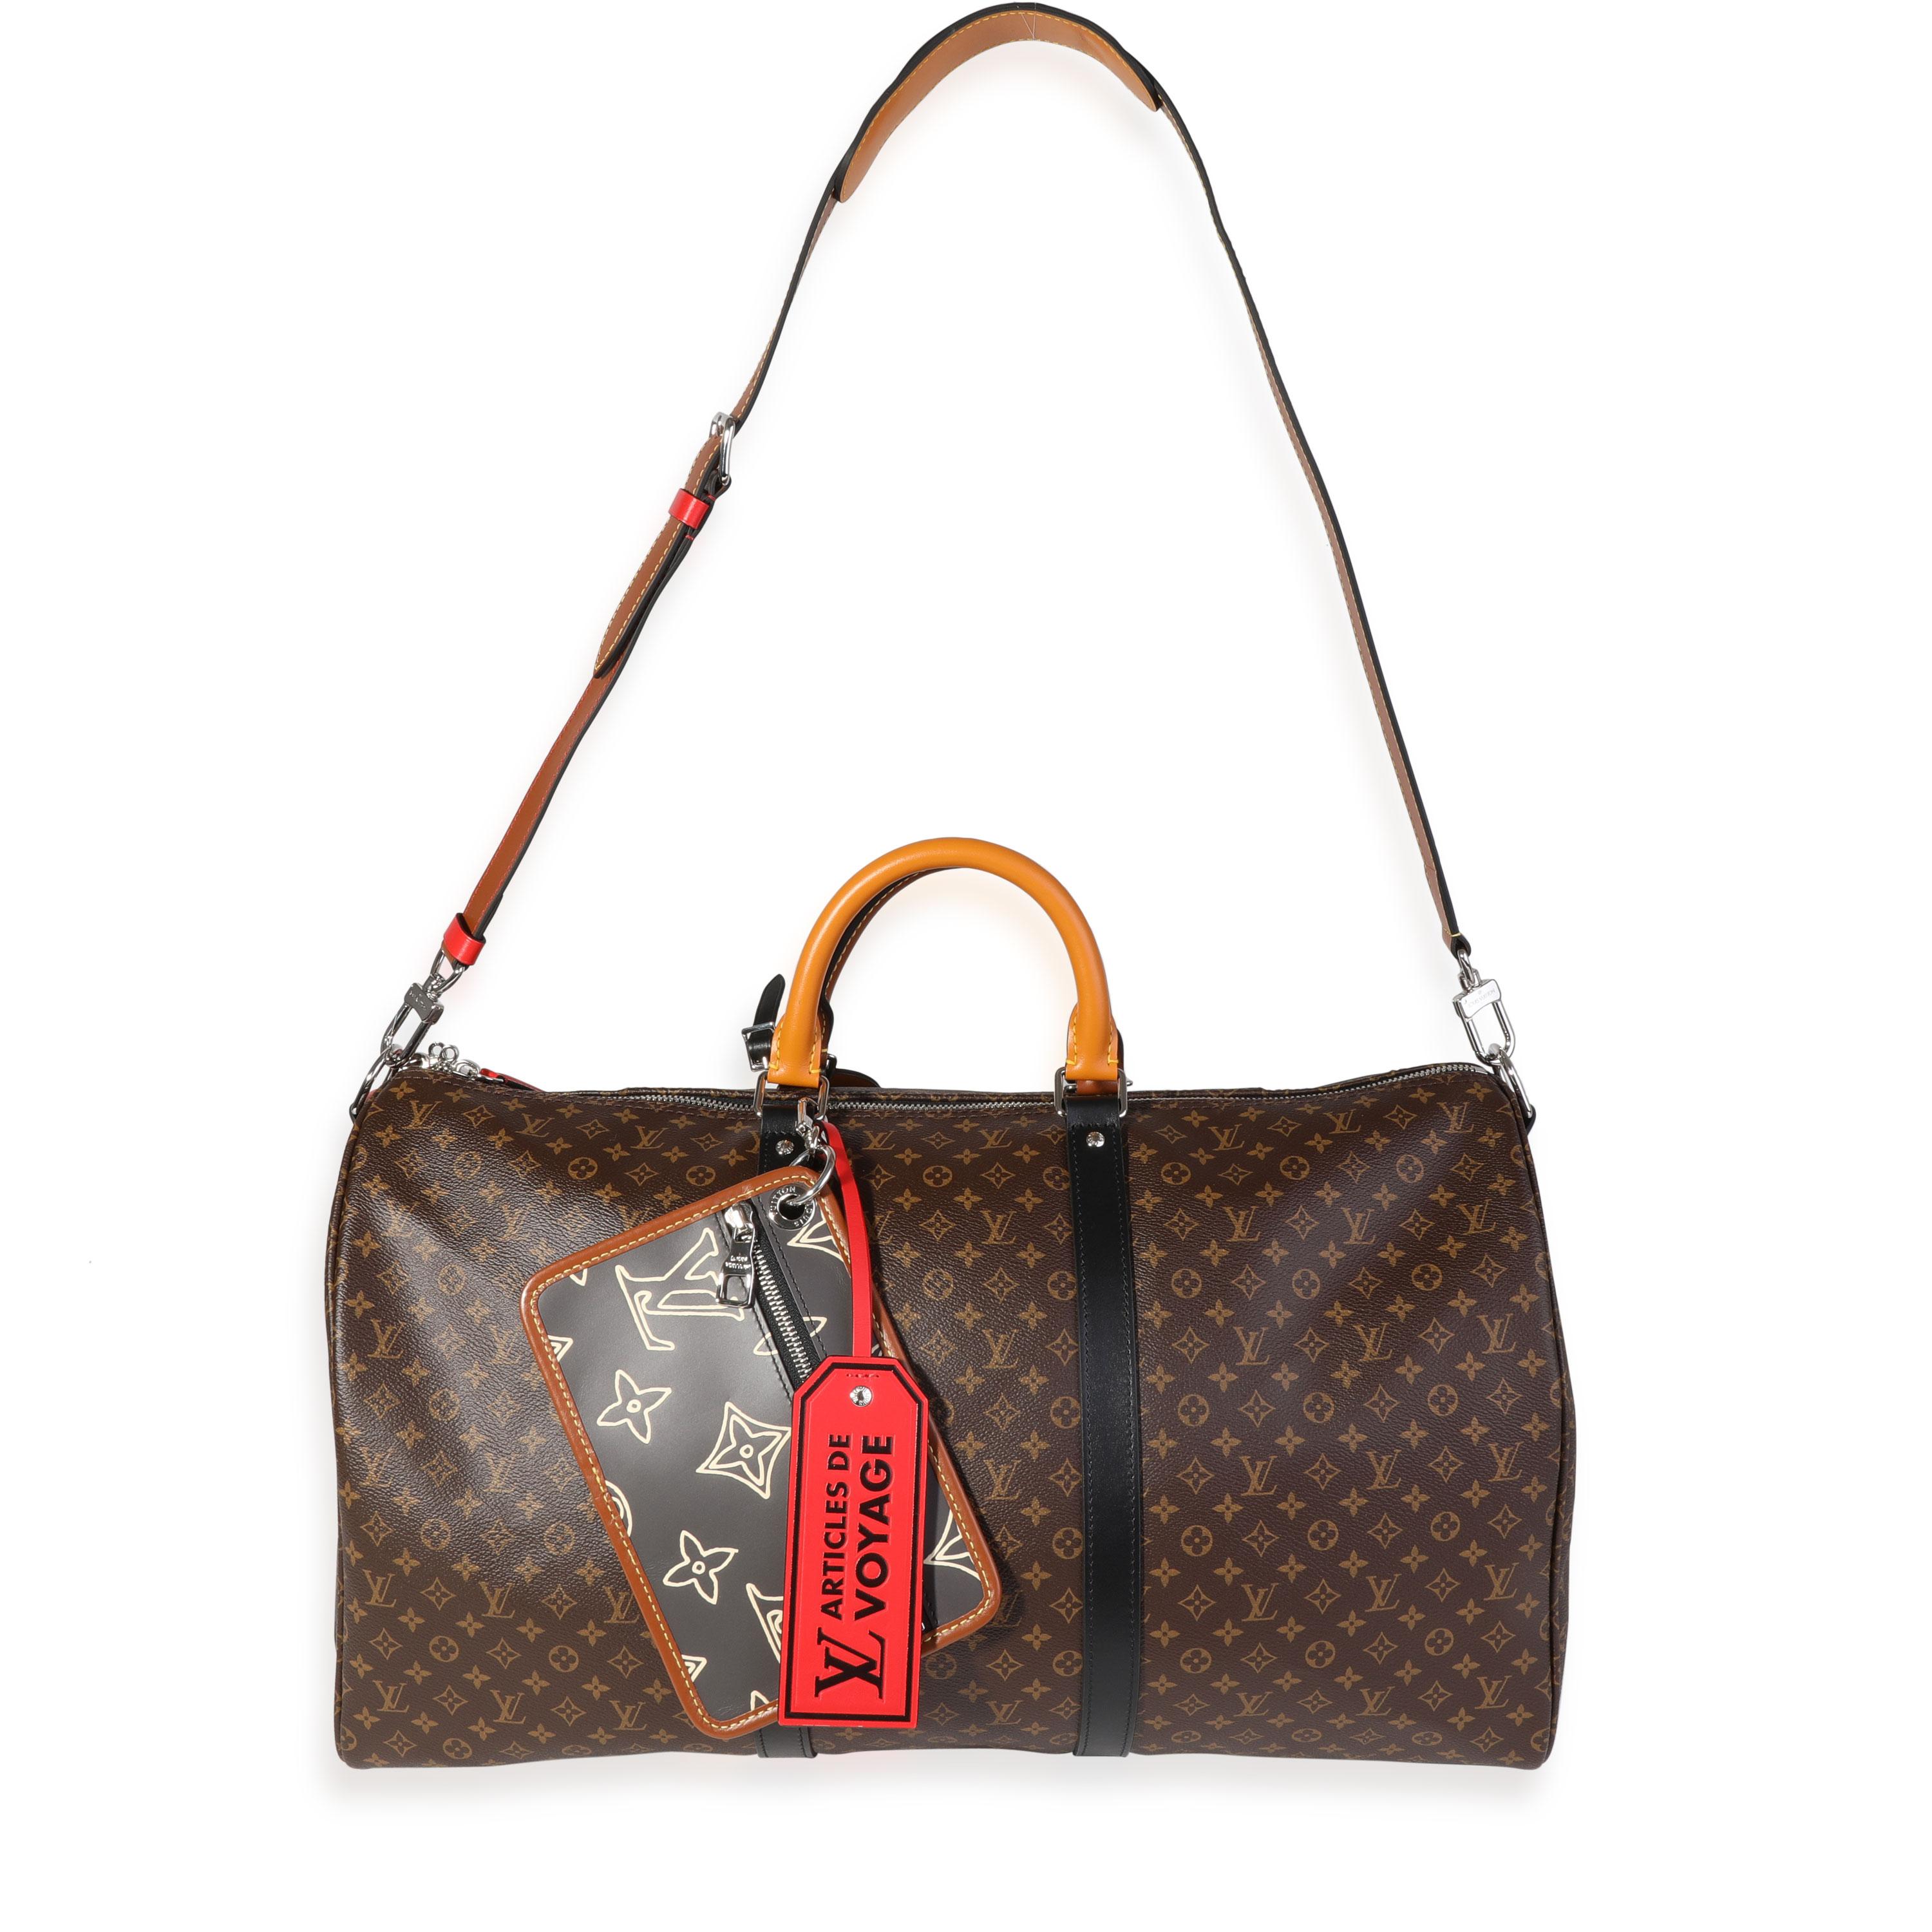 Listing Title: Louis Vuitton Monogram Patchwork Keepall Bandoulière 50
SKU: 120060
Condition: Pre-owned 
Handbag Condition: Never Worn
Brand: Louis Vuitton
Model: Monogram Patchwork Keepall Bandouliere 50
Origin Country: France
Handbag Silhouette: